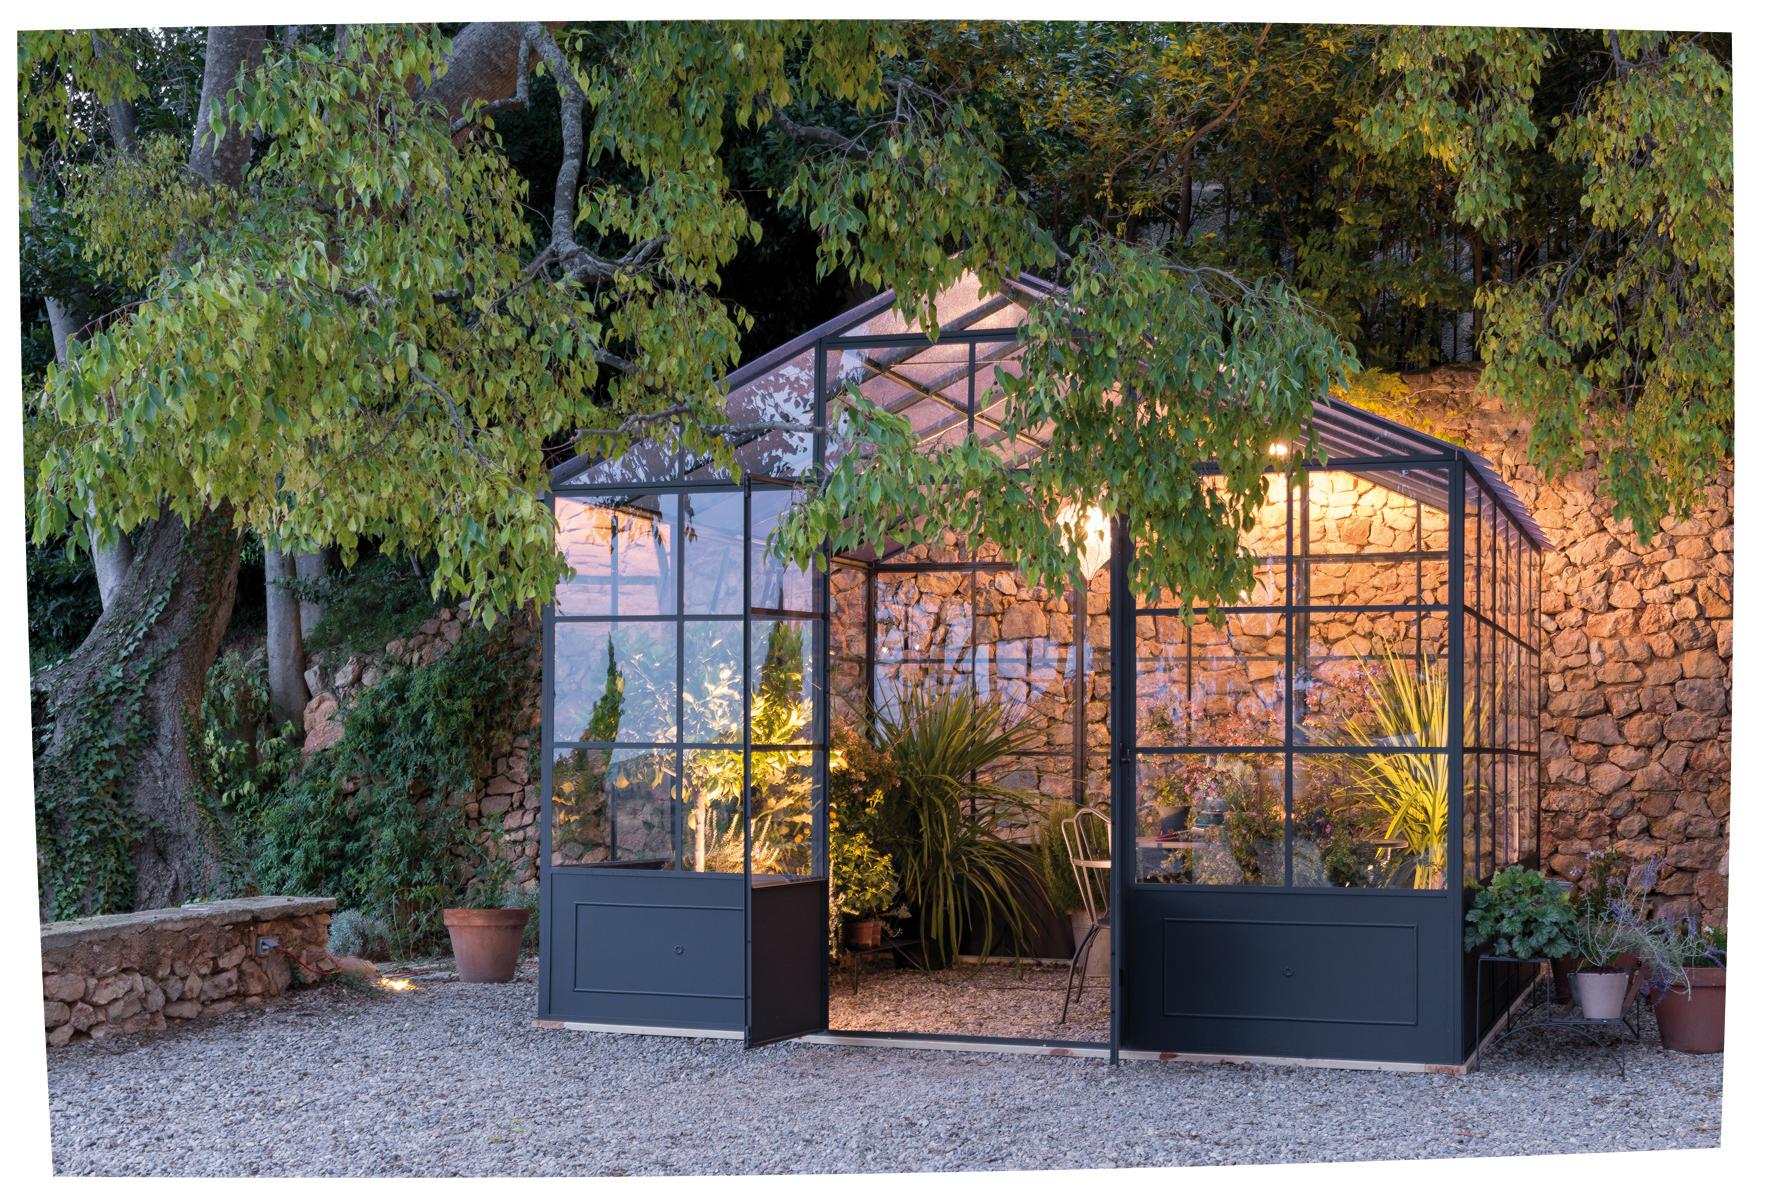 Unopiu' Orangerie Green house Collection For Sale 2